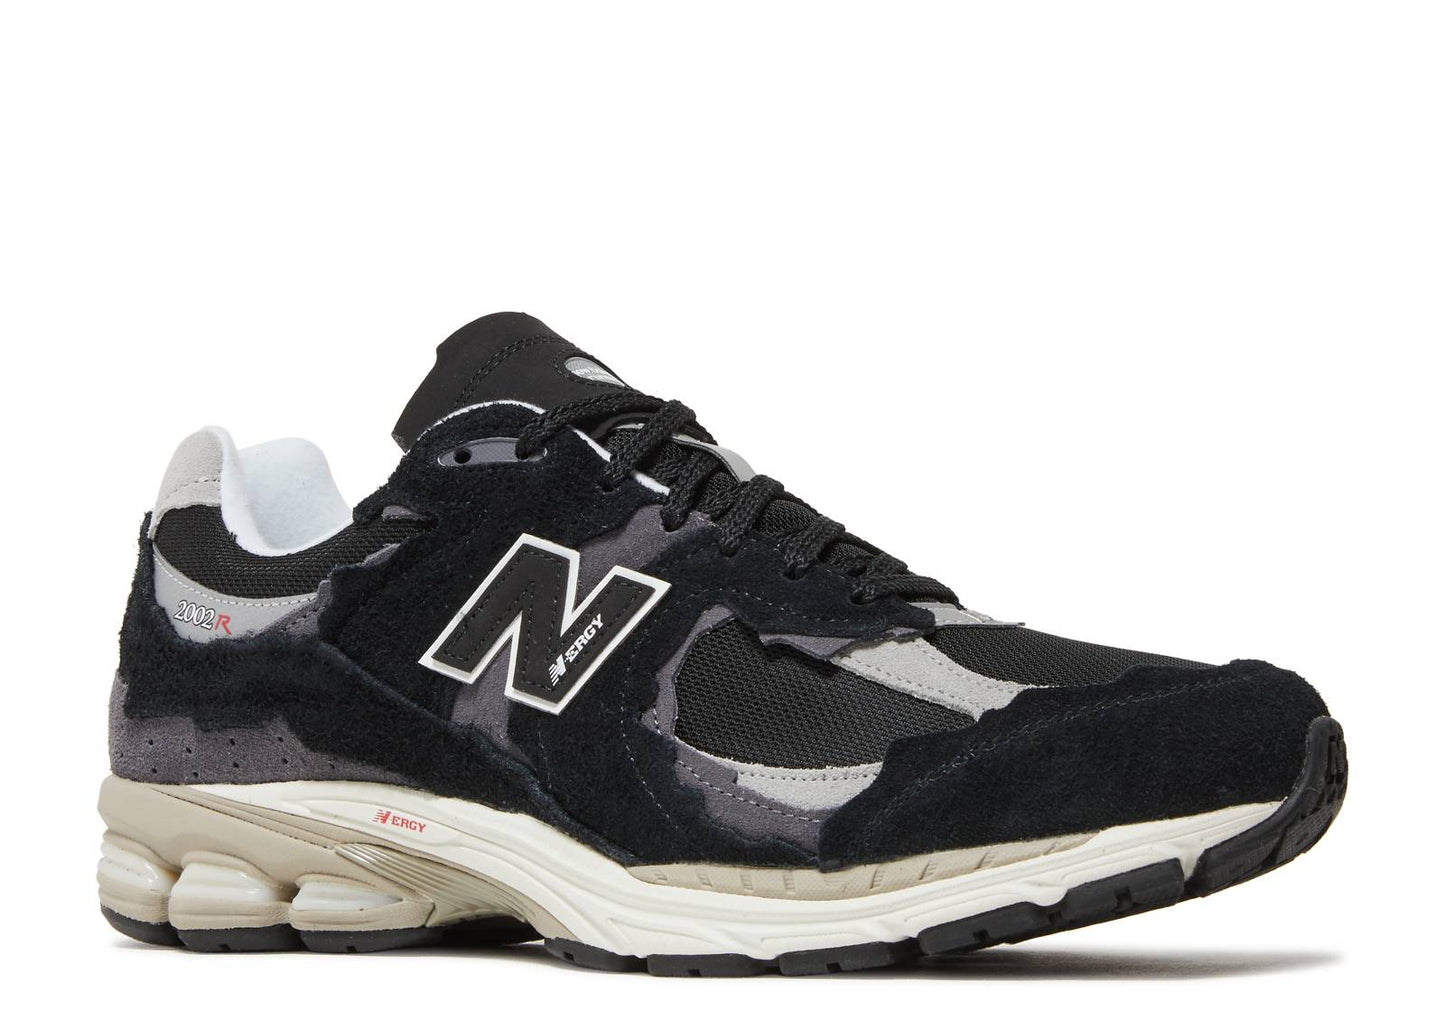 New Balance 2002R Protection Pack "Black/Grey"